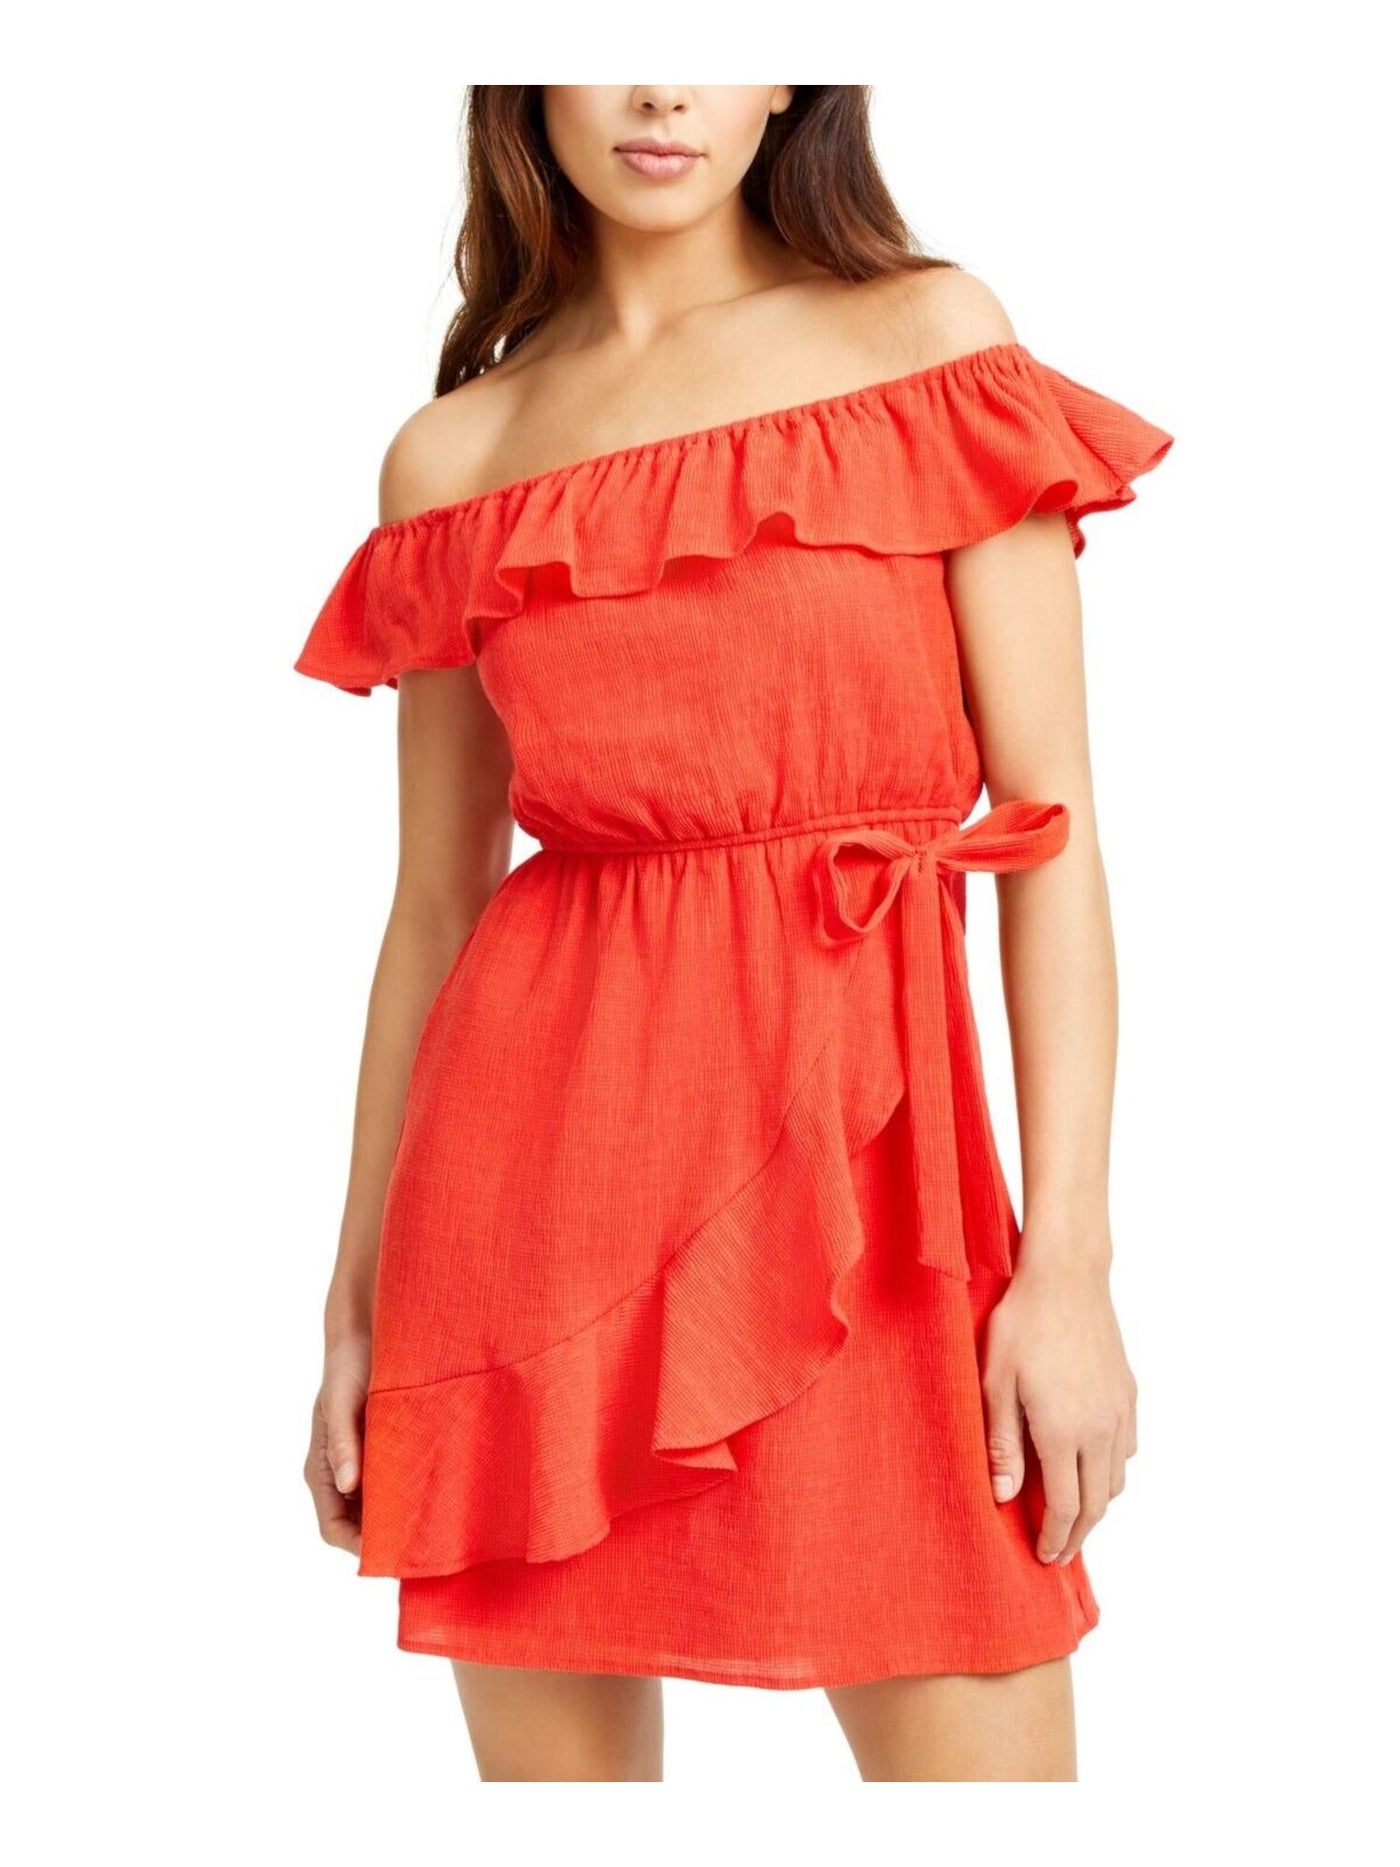 CITY STUDIO Womens Coral Stretch Textured Ruffled Tie Flutter Sleeve Off Shoulder Mini Party Fit + Flare Dress Juniors XXS